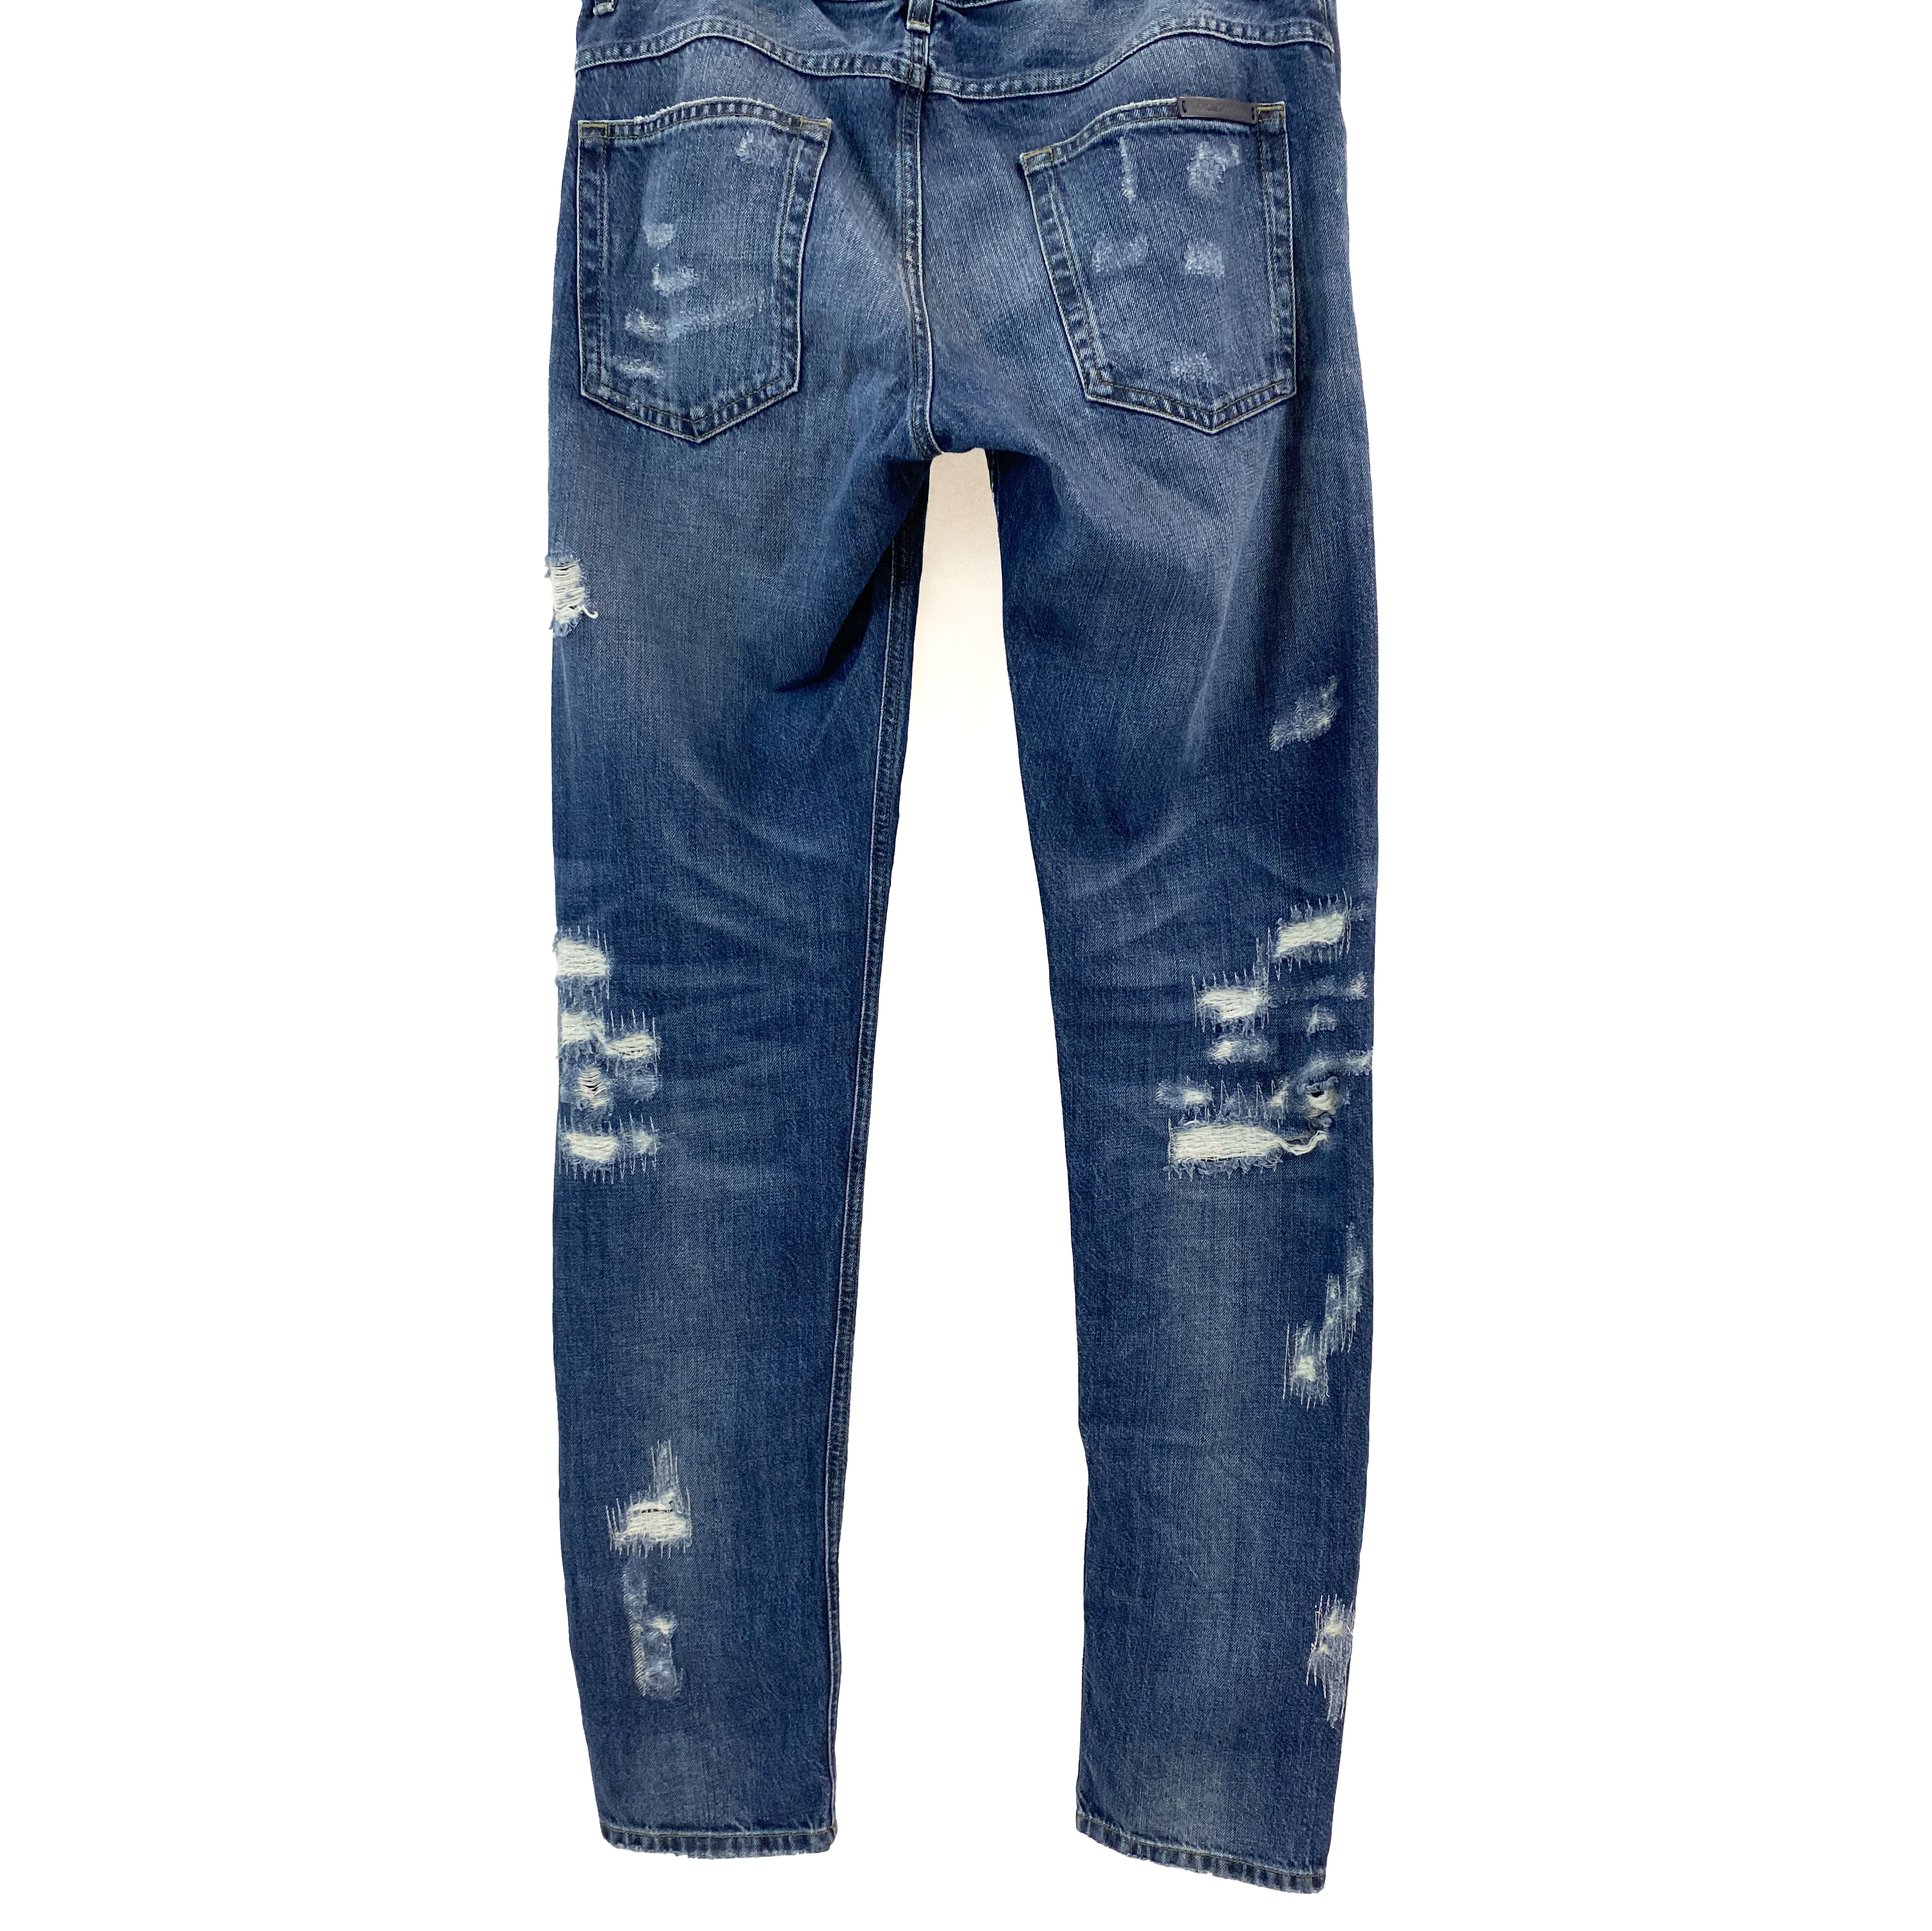 Dolce & Gabbana Men's Distressed/Ripped Jeans